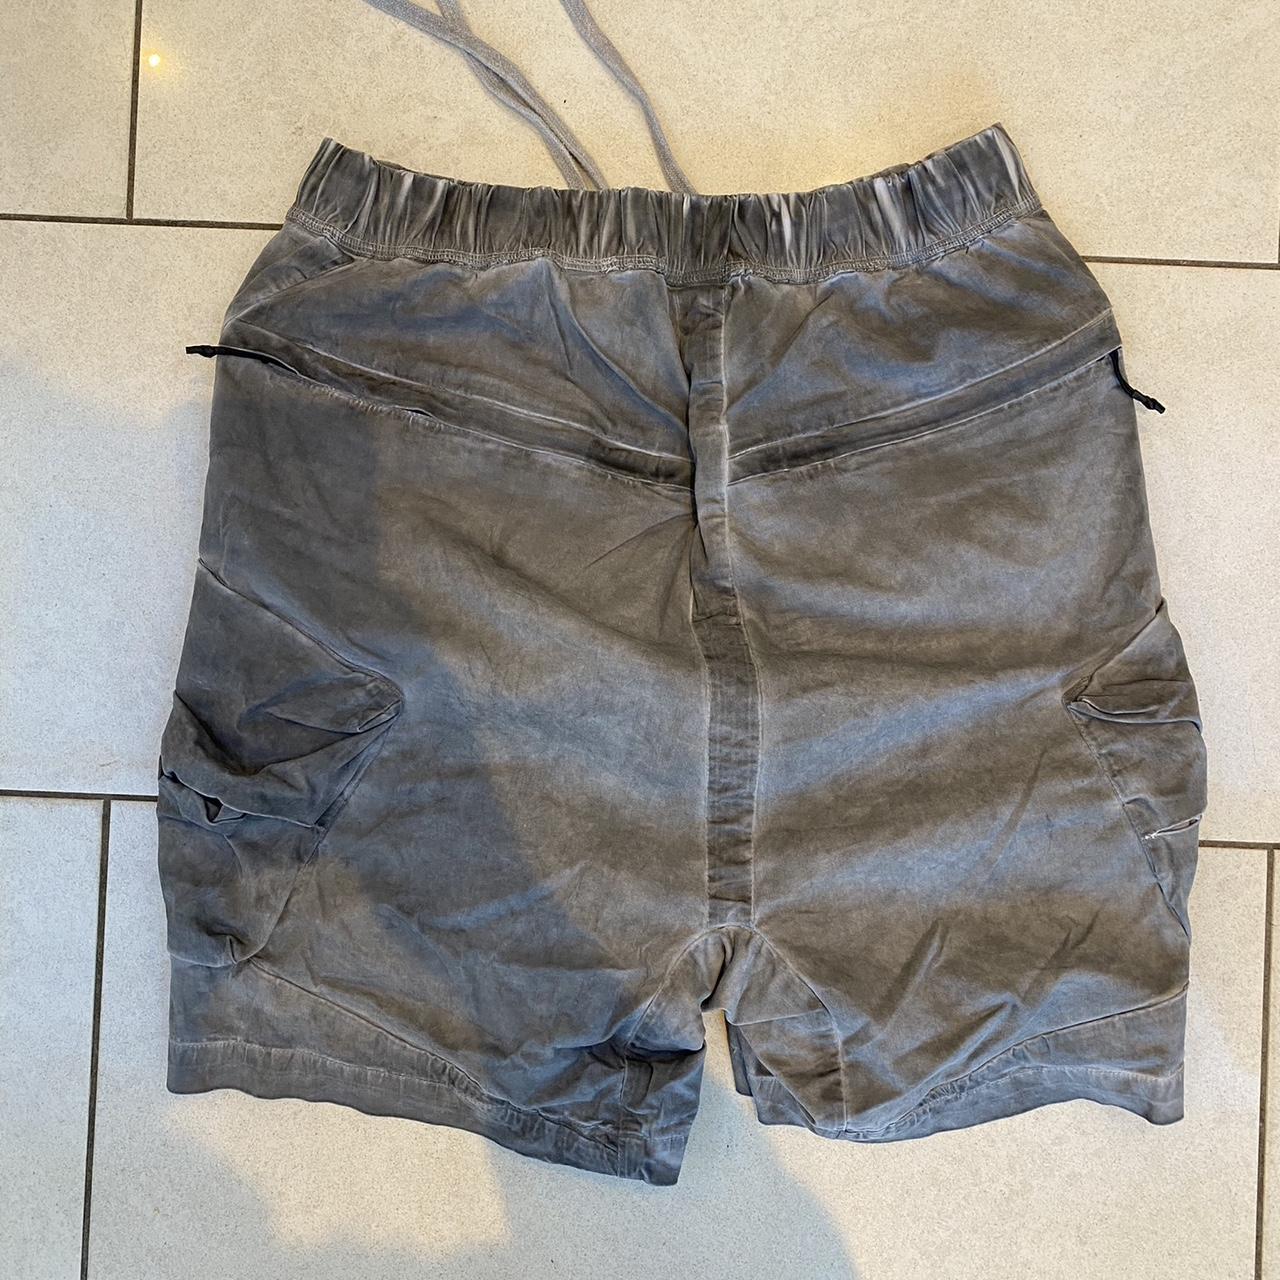 YOGALICIOUS LUX BIKER SHORTS SIZE: Small #casual - Depop